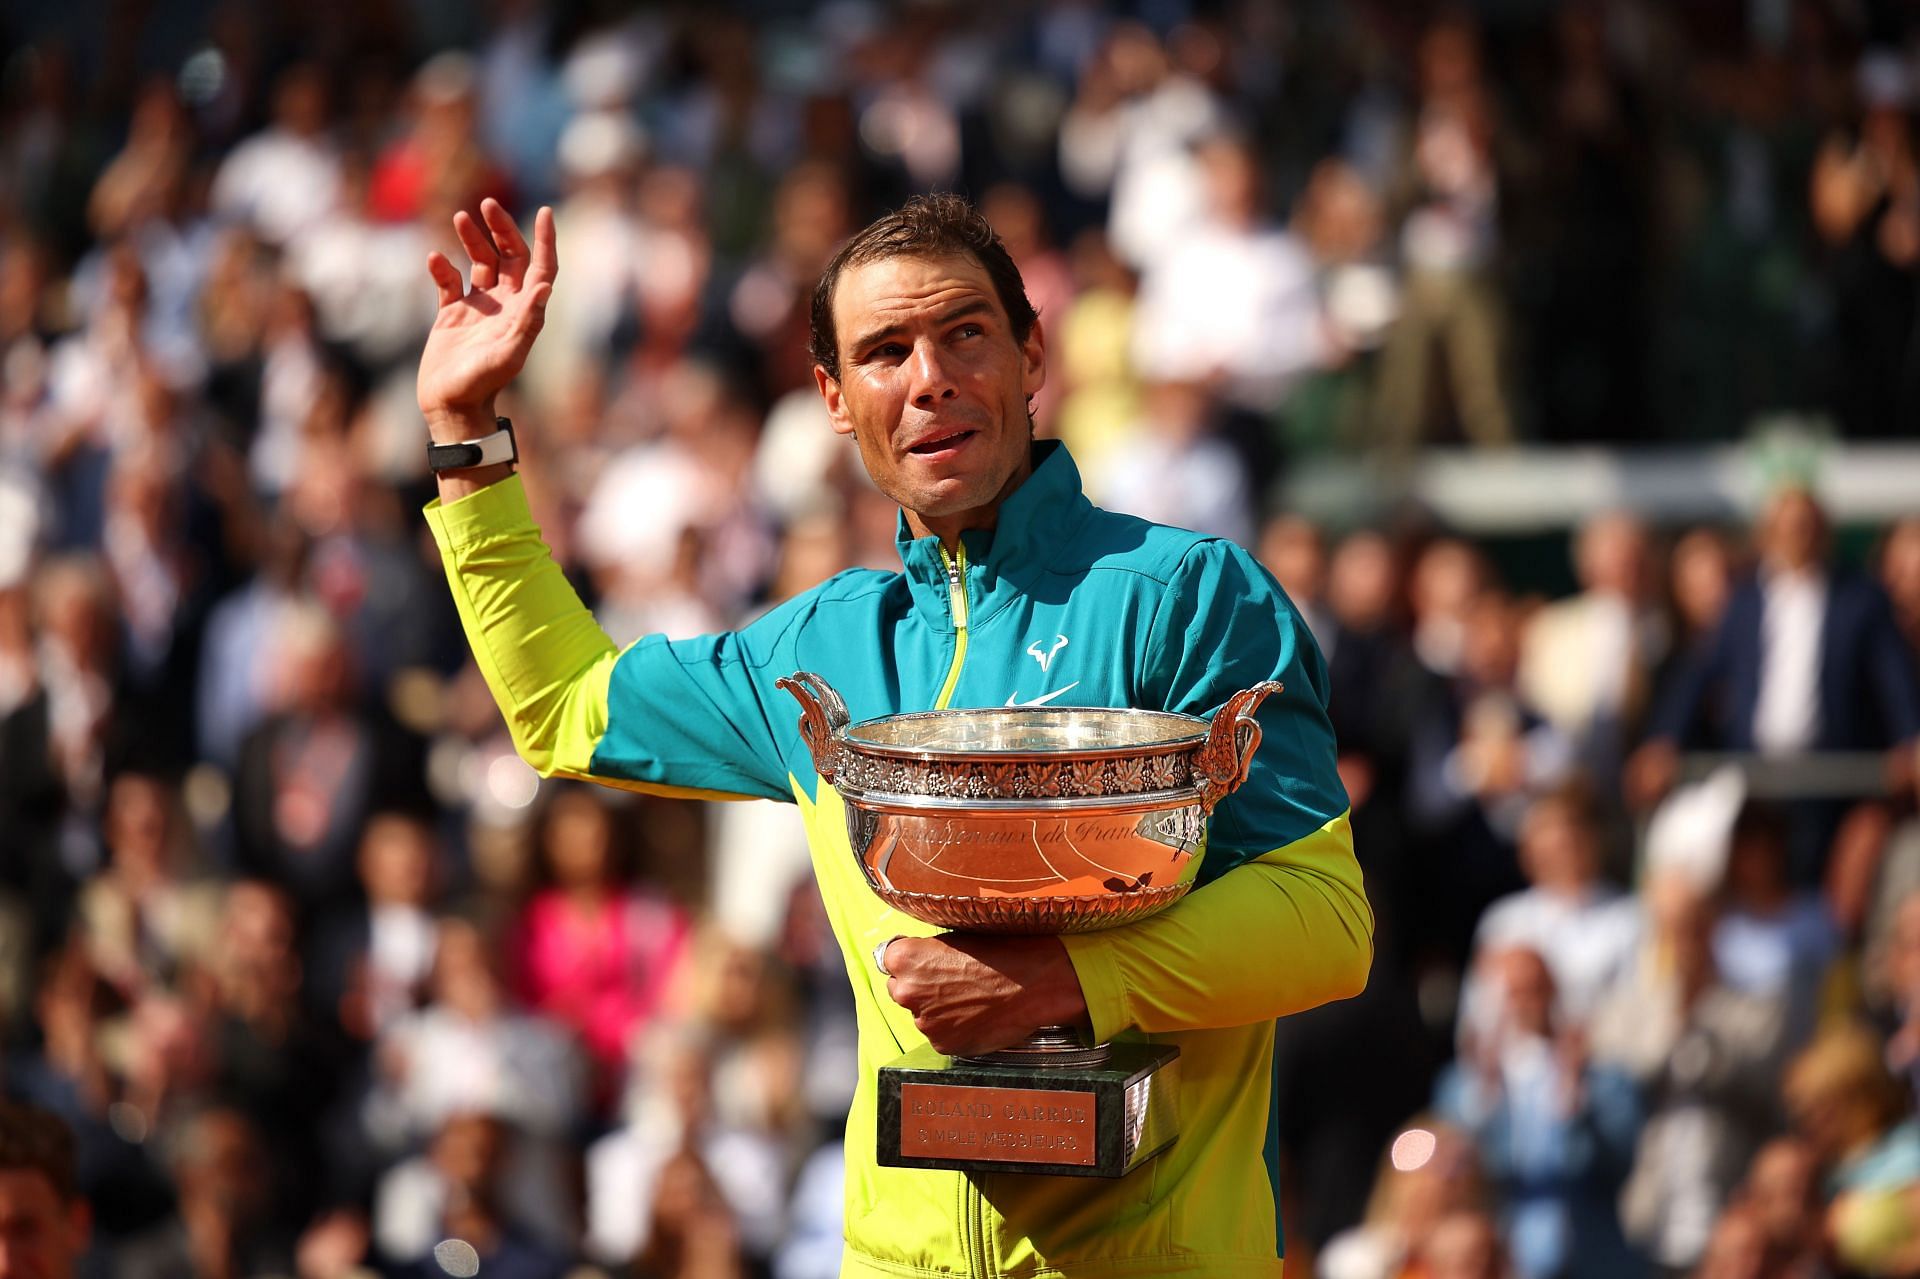 Rafael Nadal has the opportunity to win three Grand Slams this year.